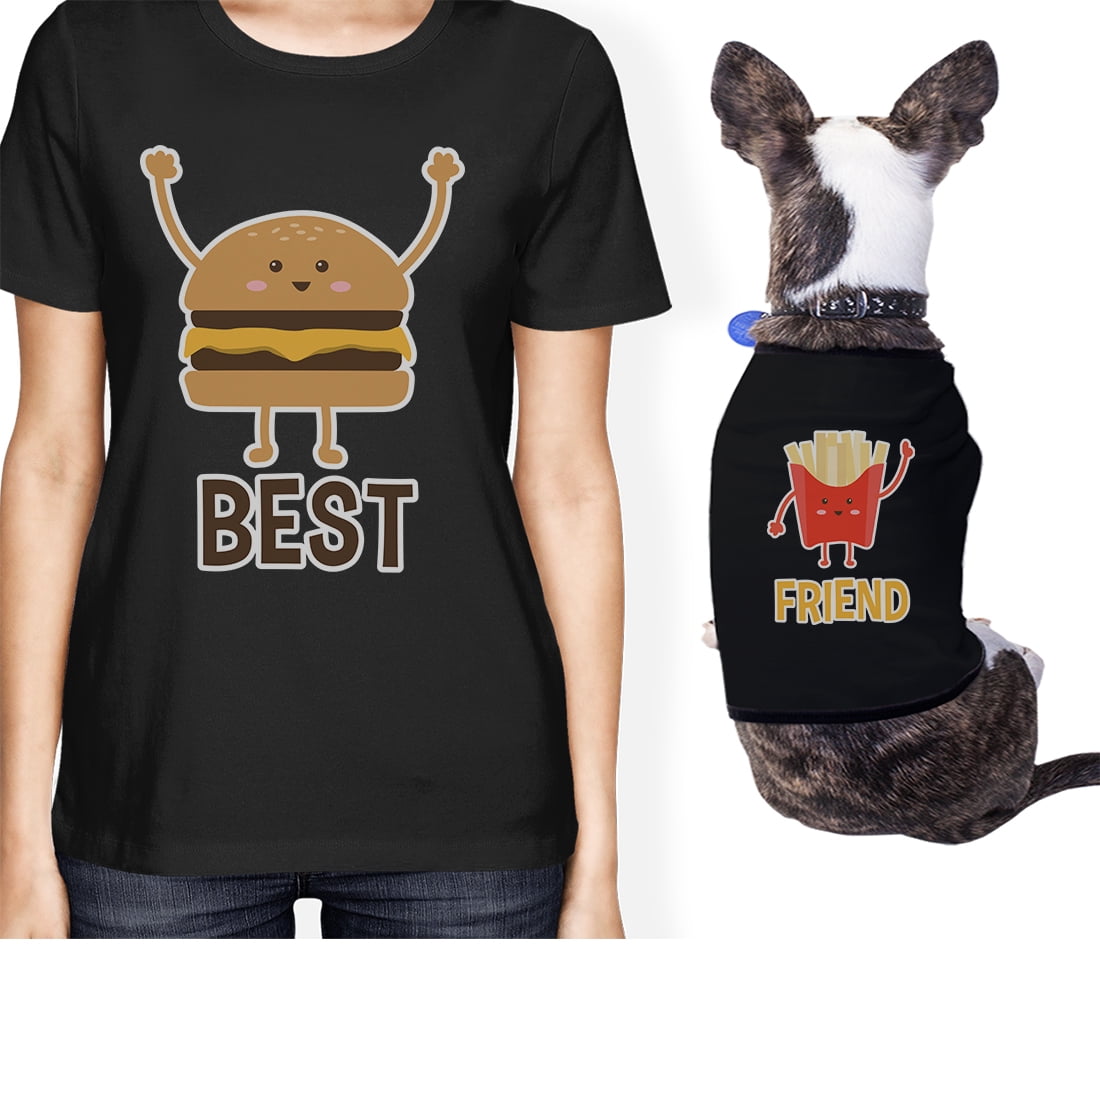 Hamburger And Fries Small Pet Owner Matching Gift Outfits For Her 